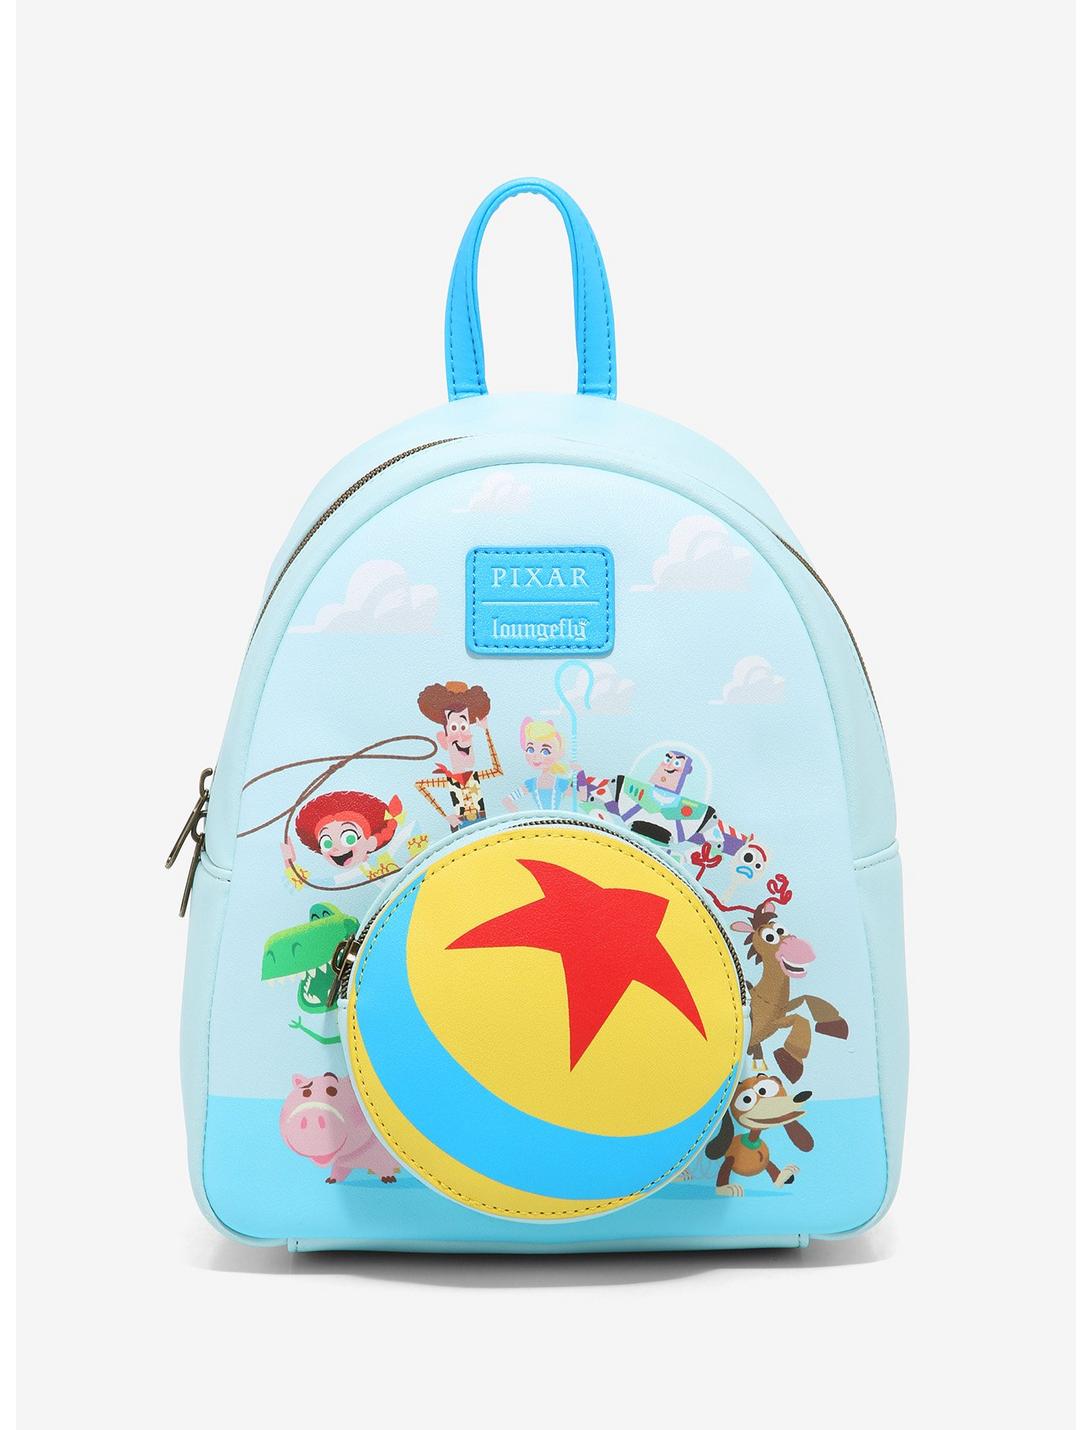 Loungefly Disney Pixar Toy Story Group & Luxo Ball Mini Backpack, , hi-res